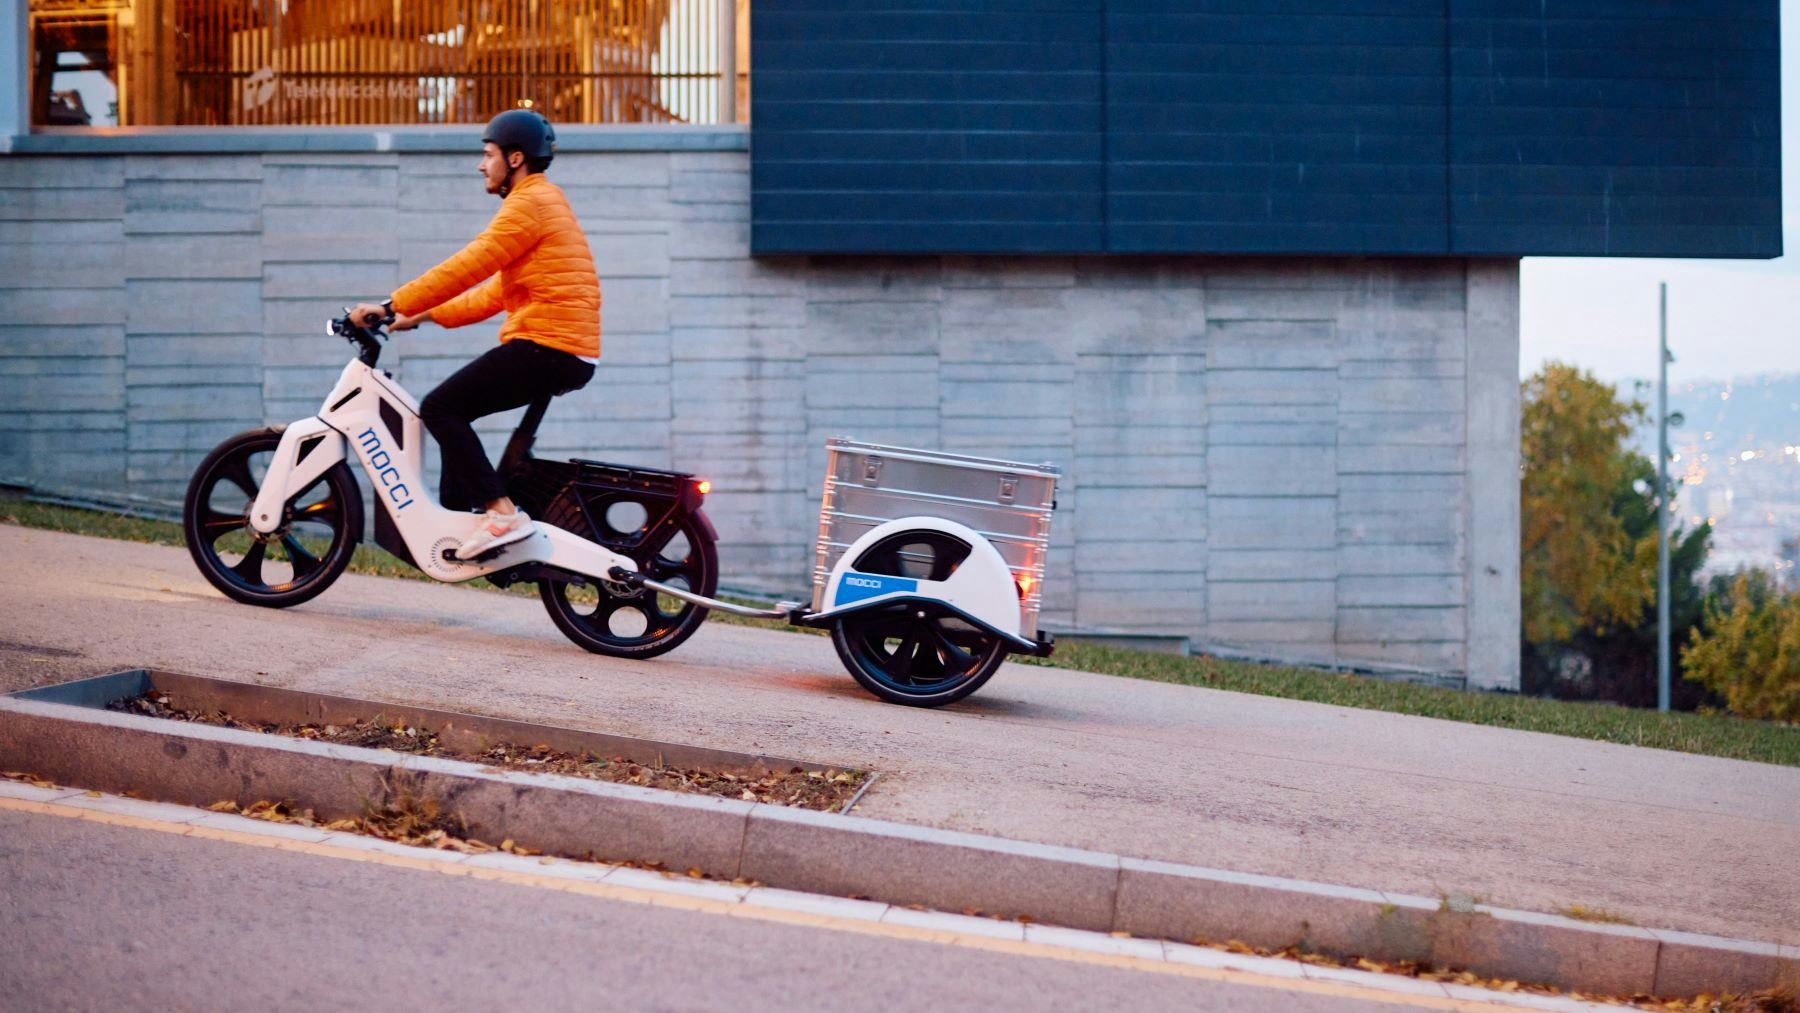 Combined with a trailer, the Mocci Smart Pedal Vehicle (SPV) can be used to implement a variety of transportation and logistics scenarios. - Photo Mocci/Adrien Crasnault